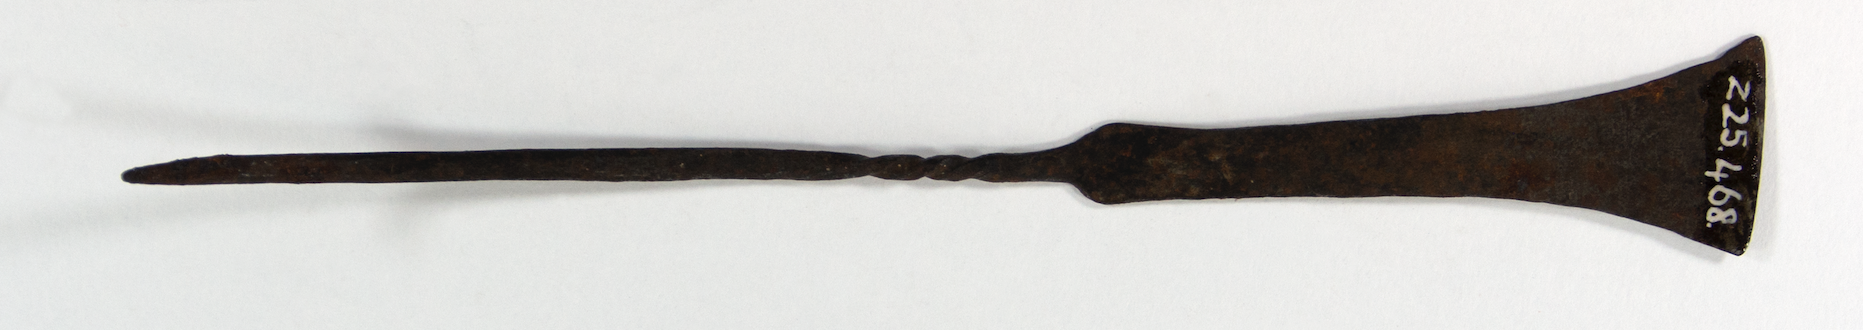 Iron hairpin with a thin handle. The upper shaft is cylindrical and twisted, and with a flat flared edge.